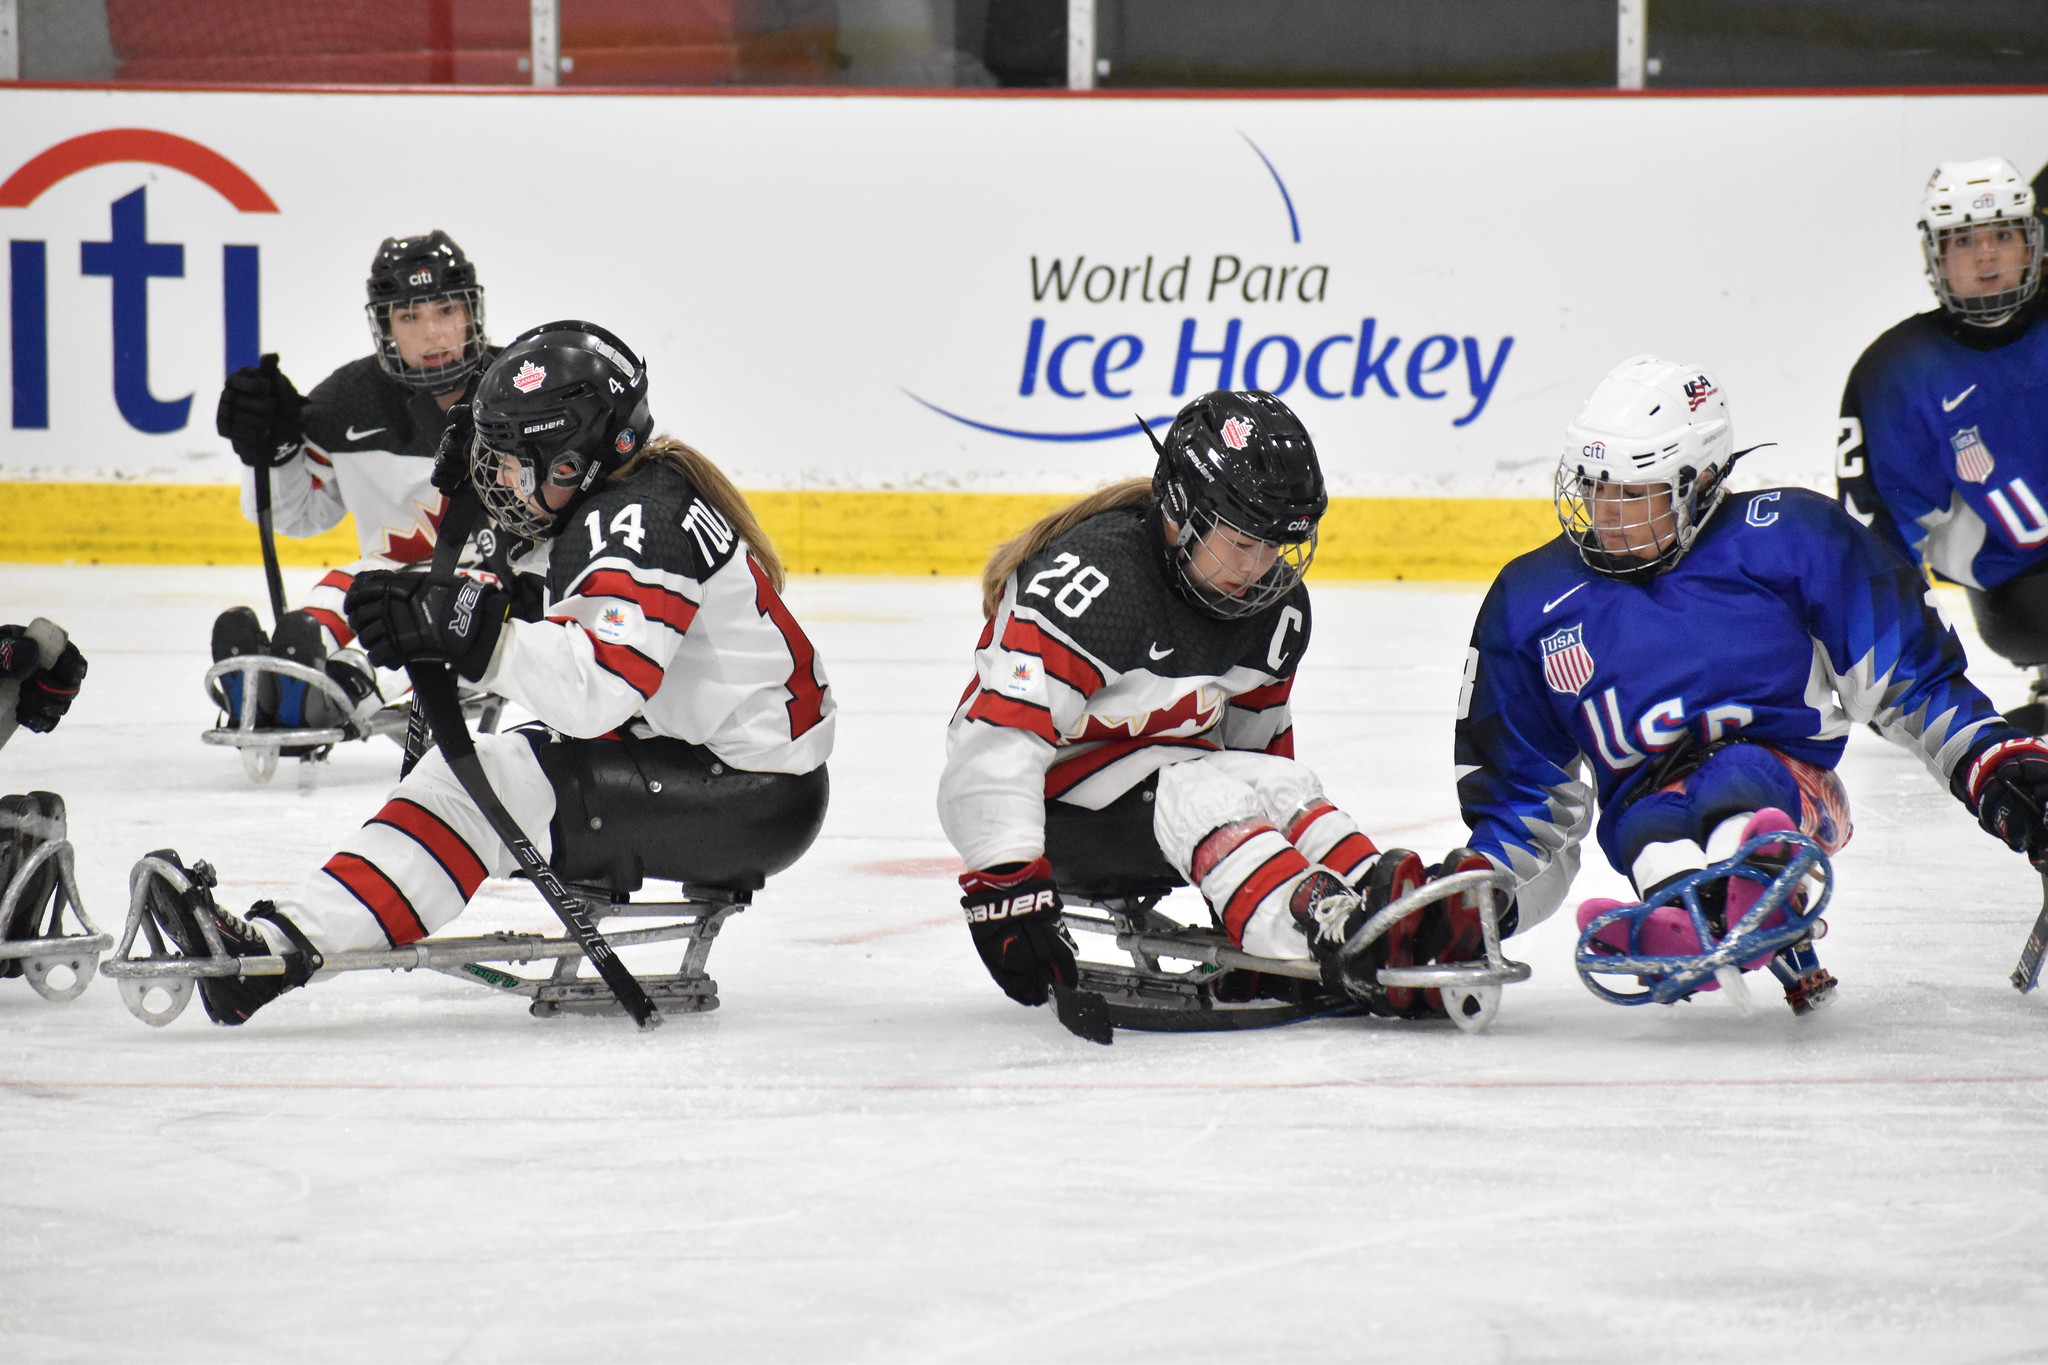 Raphalle Tousignant and Alanna Mah in action at the Para Ice Hockey Women's World Challenge